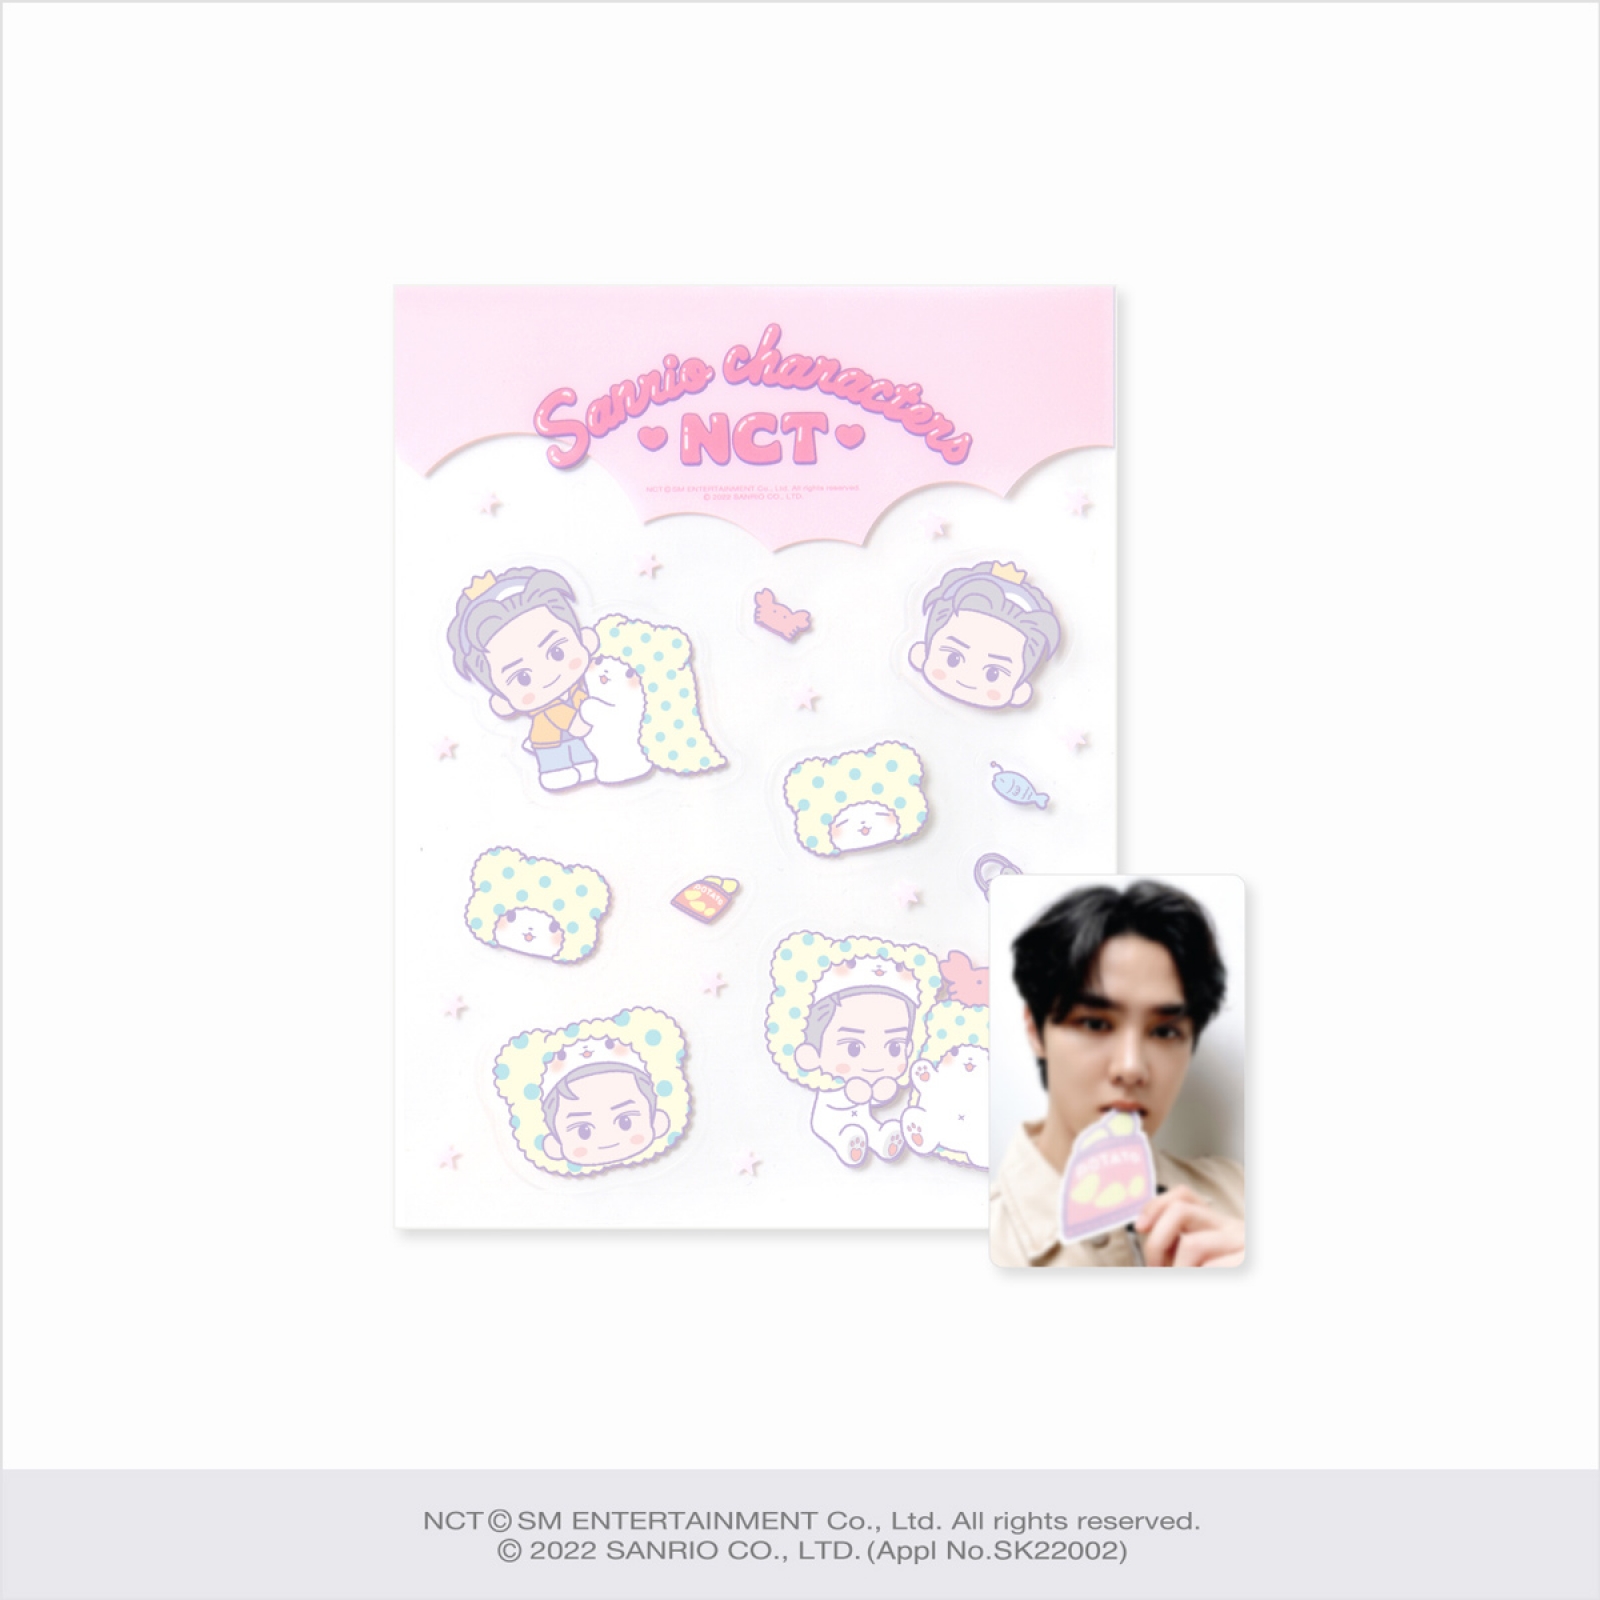 NCT - 透明ステッカー+フォトカードセット/ NCT X SANRIO CHARACTERS